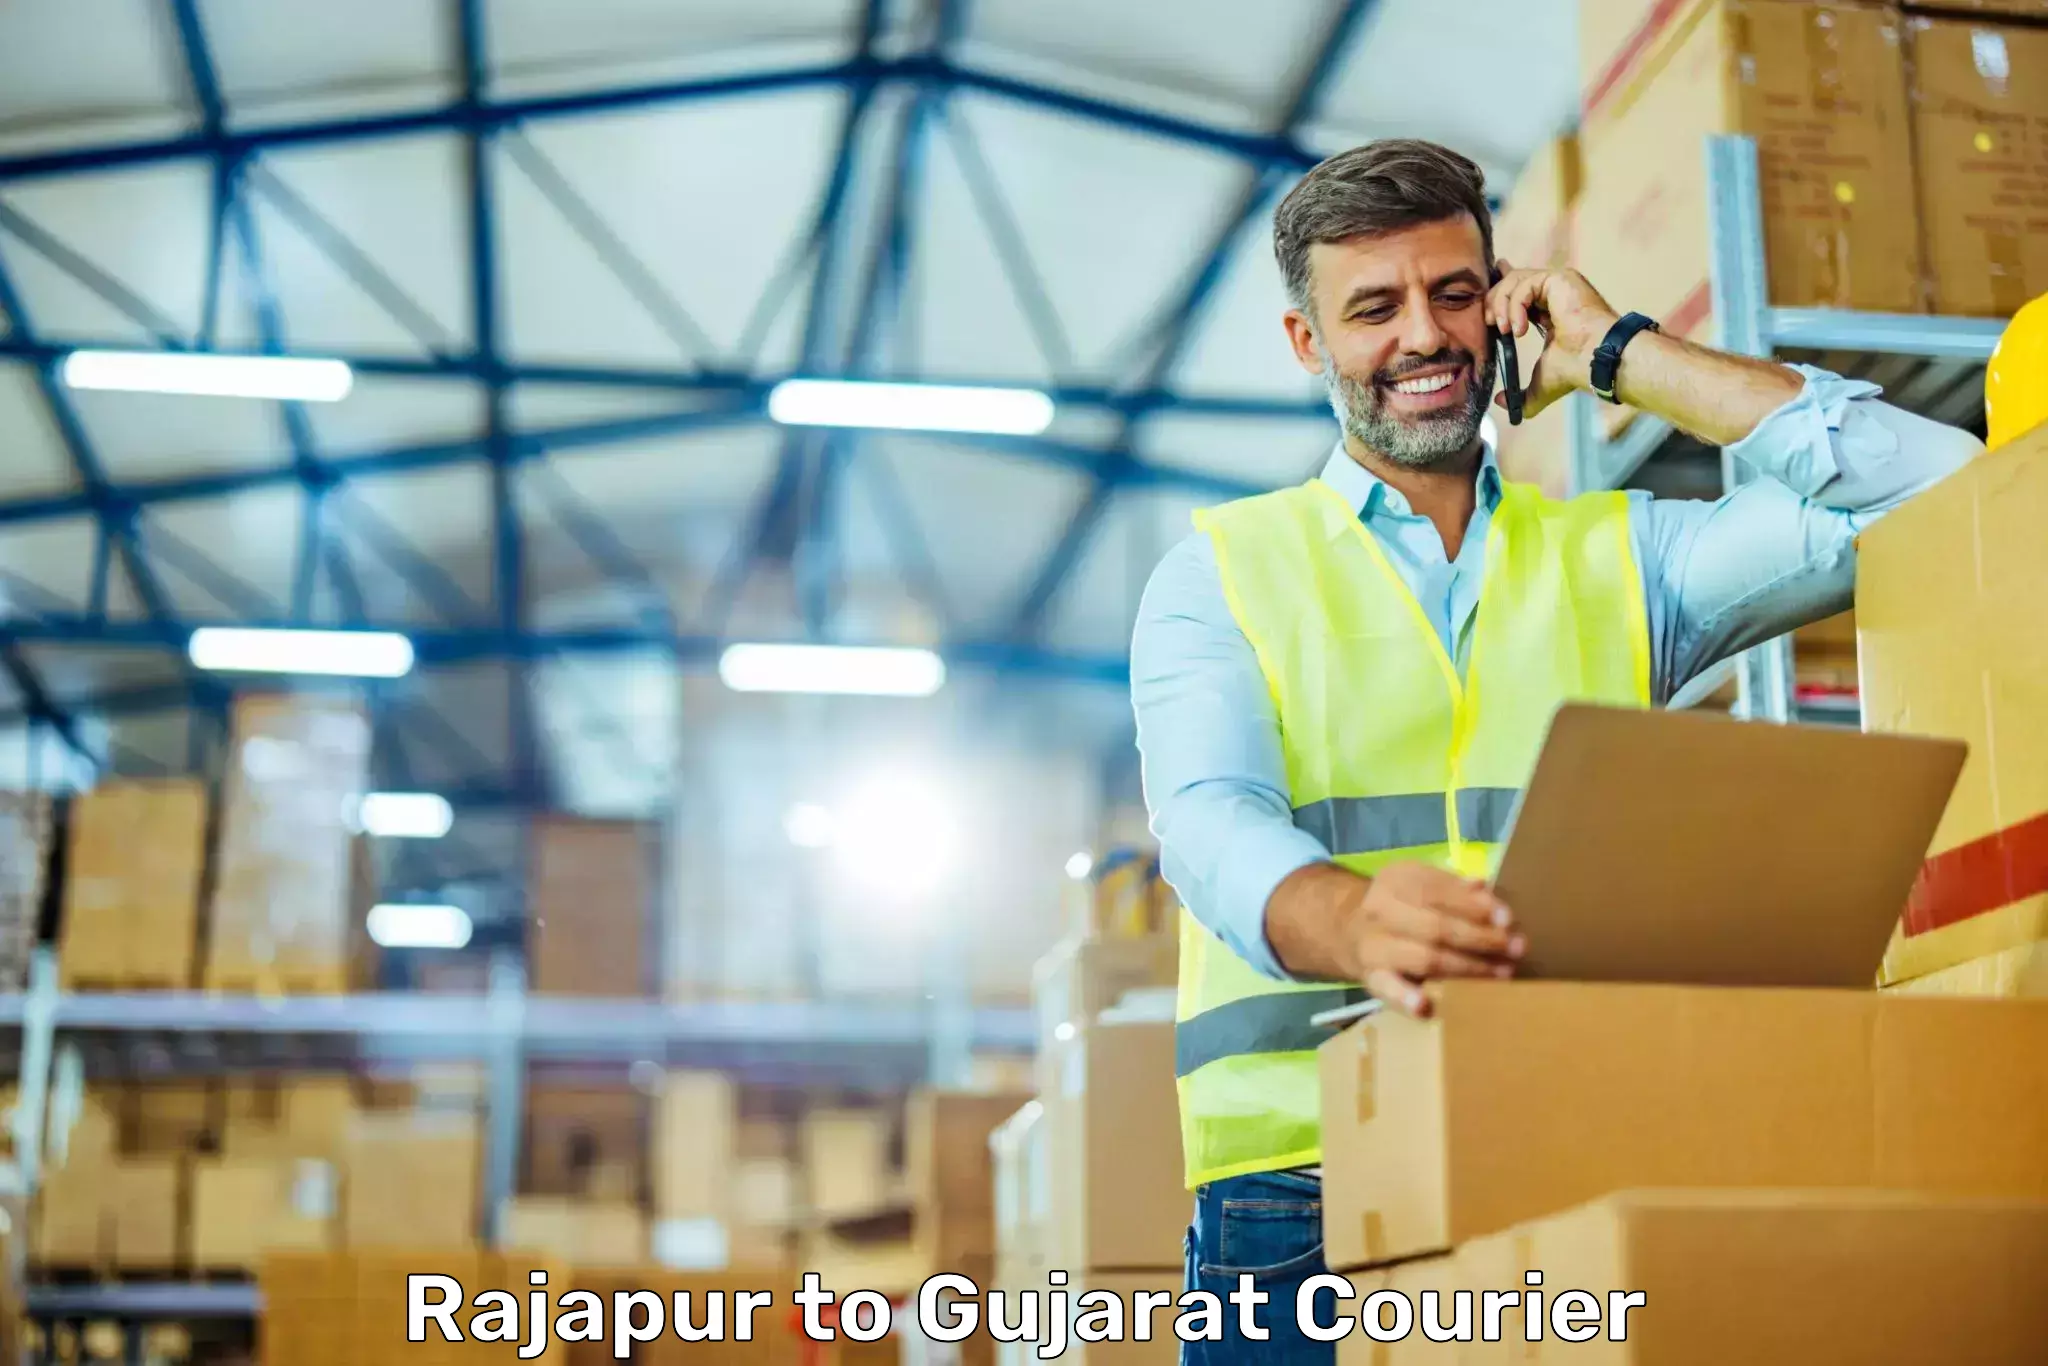 Business delivery service Rajapur to Nanpura